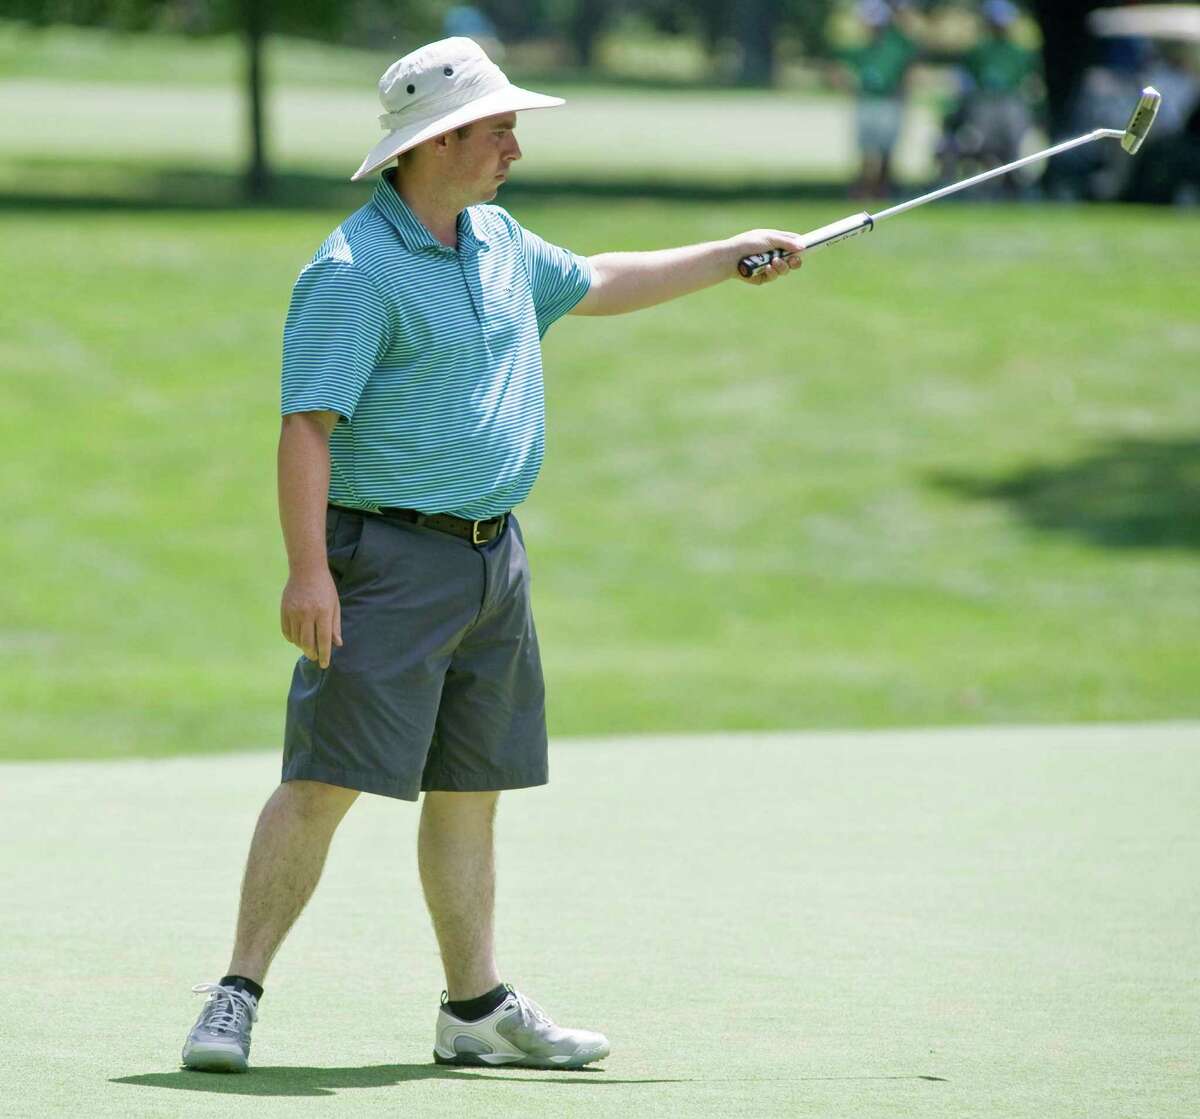 William Street of Whitney Farms GC thinks his putt is going to drop during the final round of the Connecticut Open golf tournament at Woodway CC in Darien. Wednesday, July 27, 2016